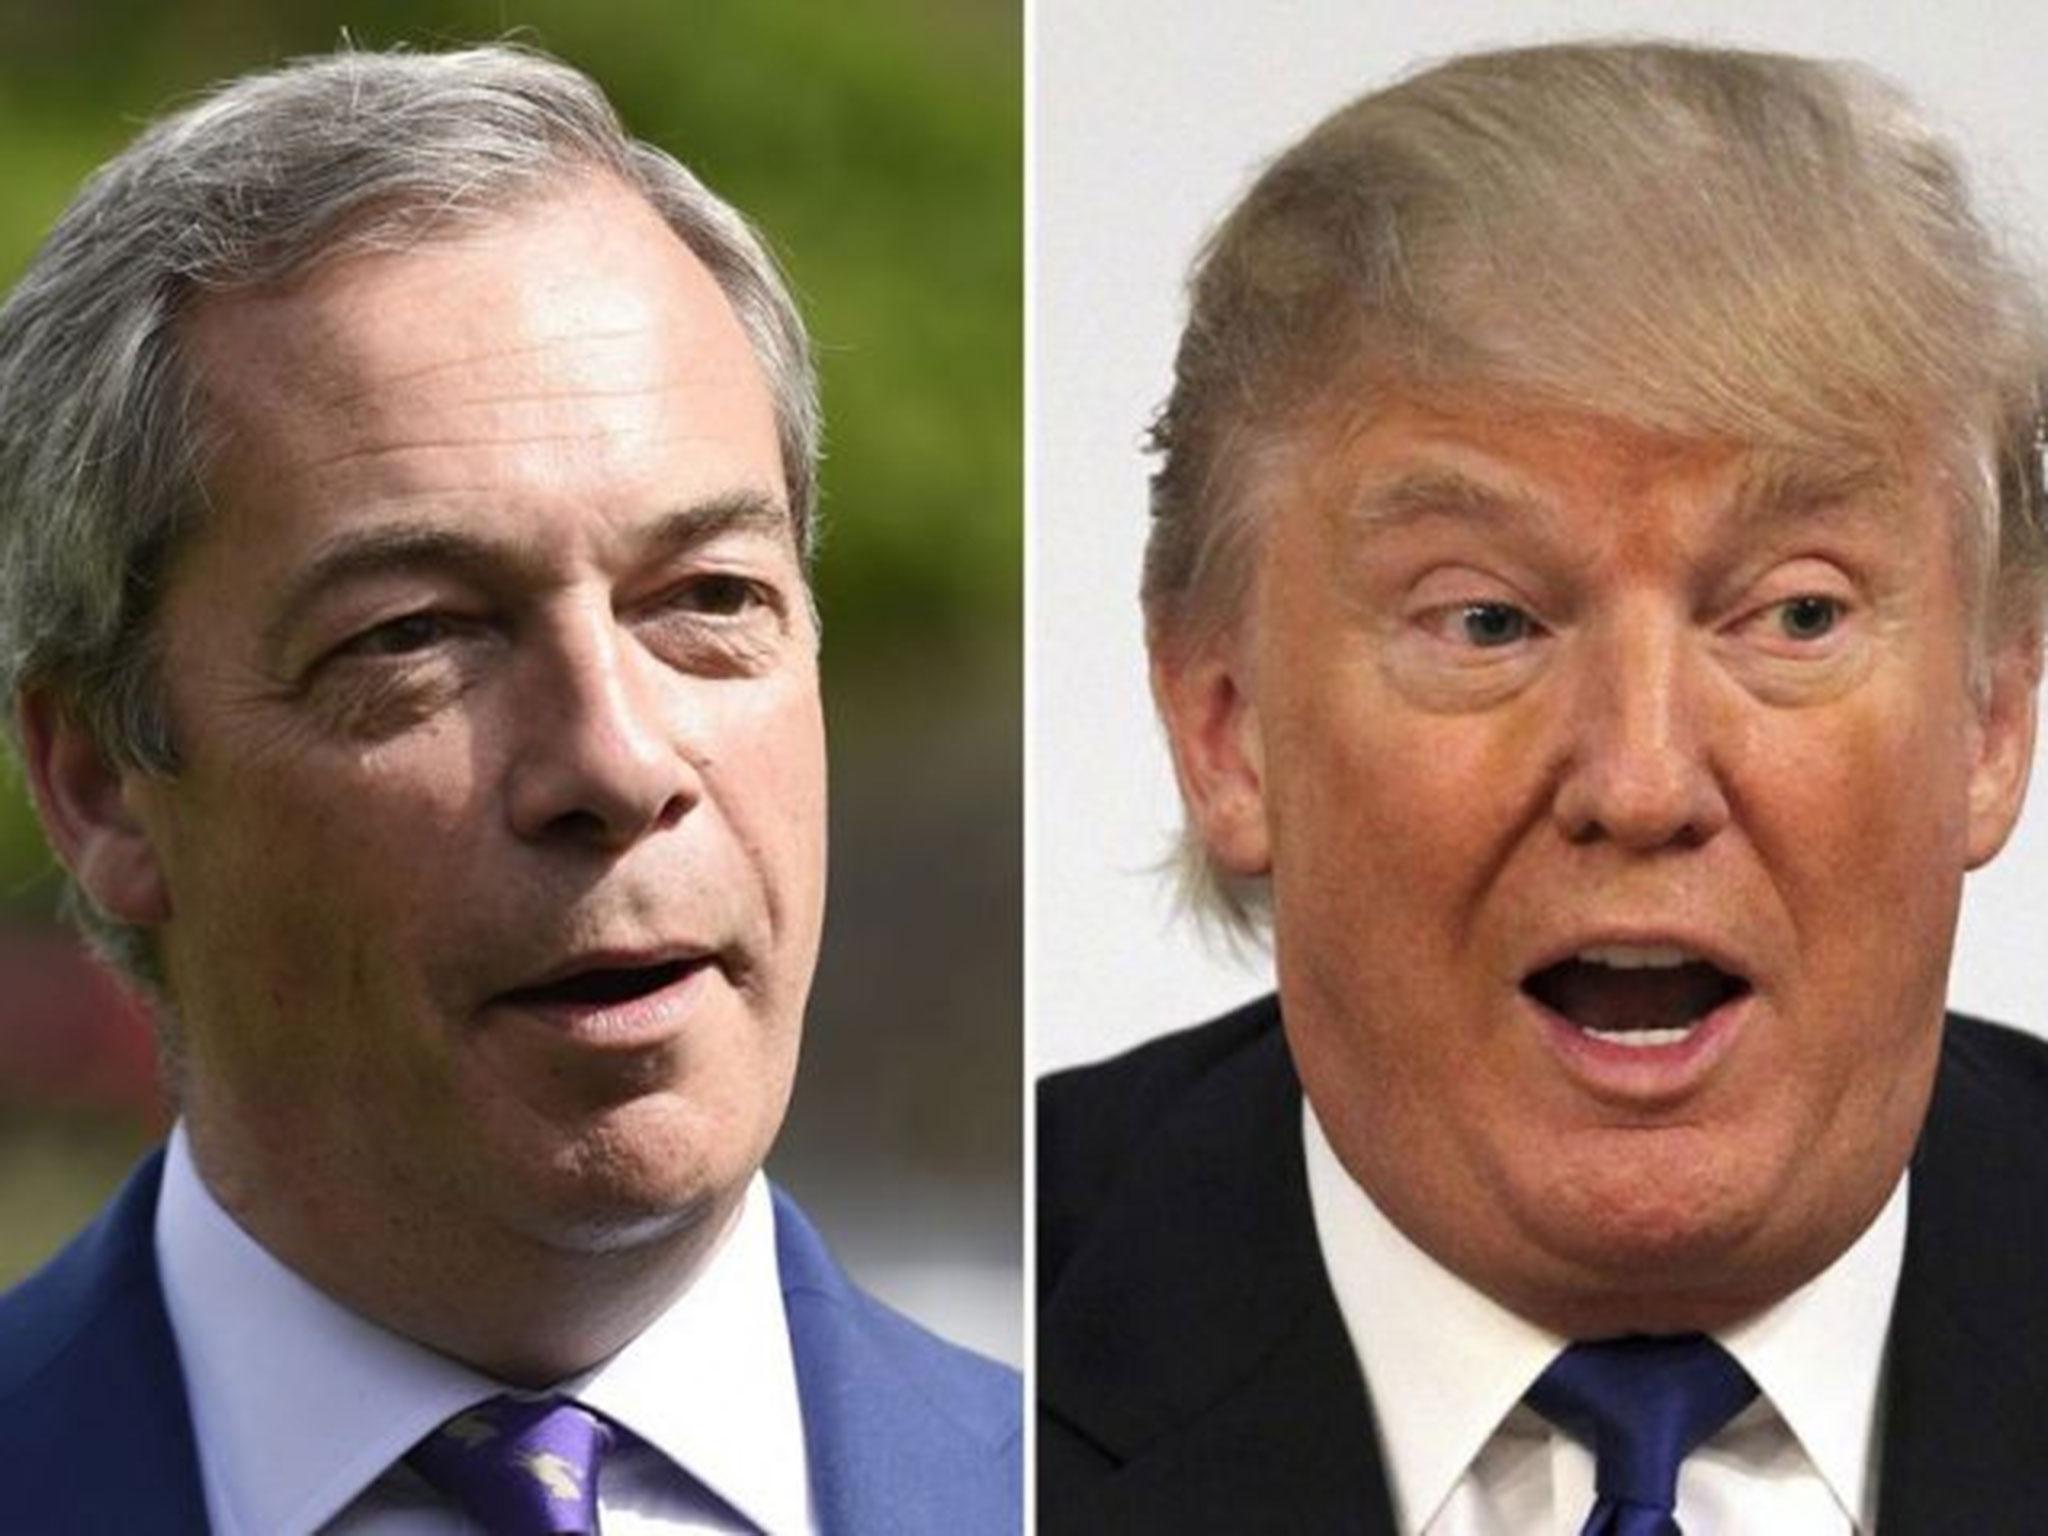 Nigel Farage has been an outspoken advocate of Donald Trump